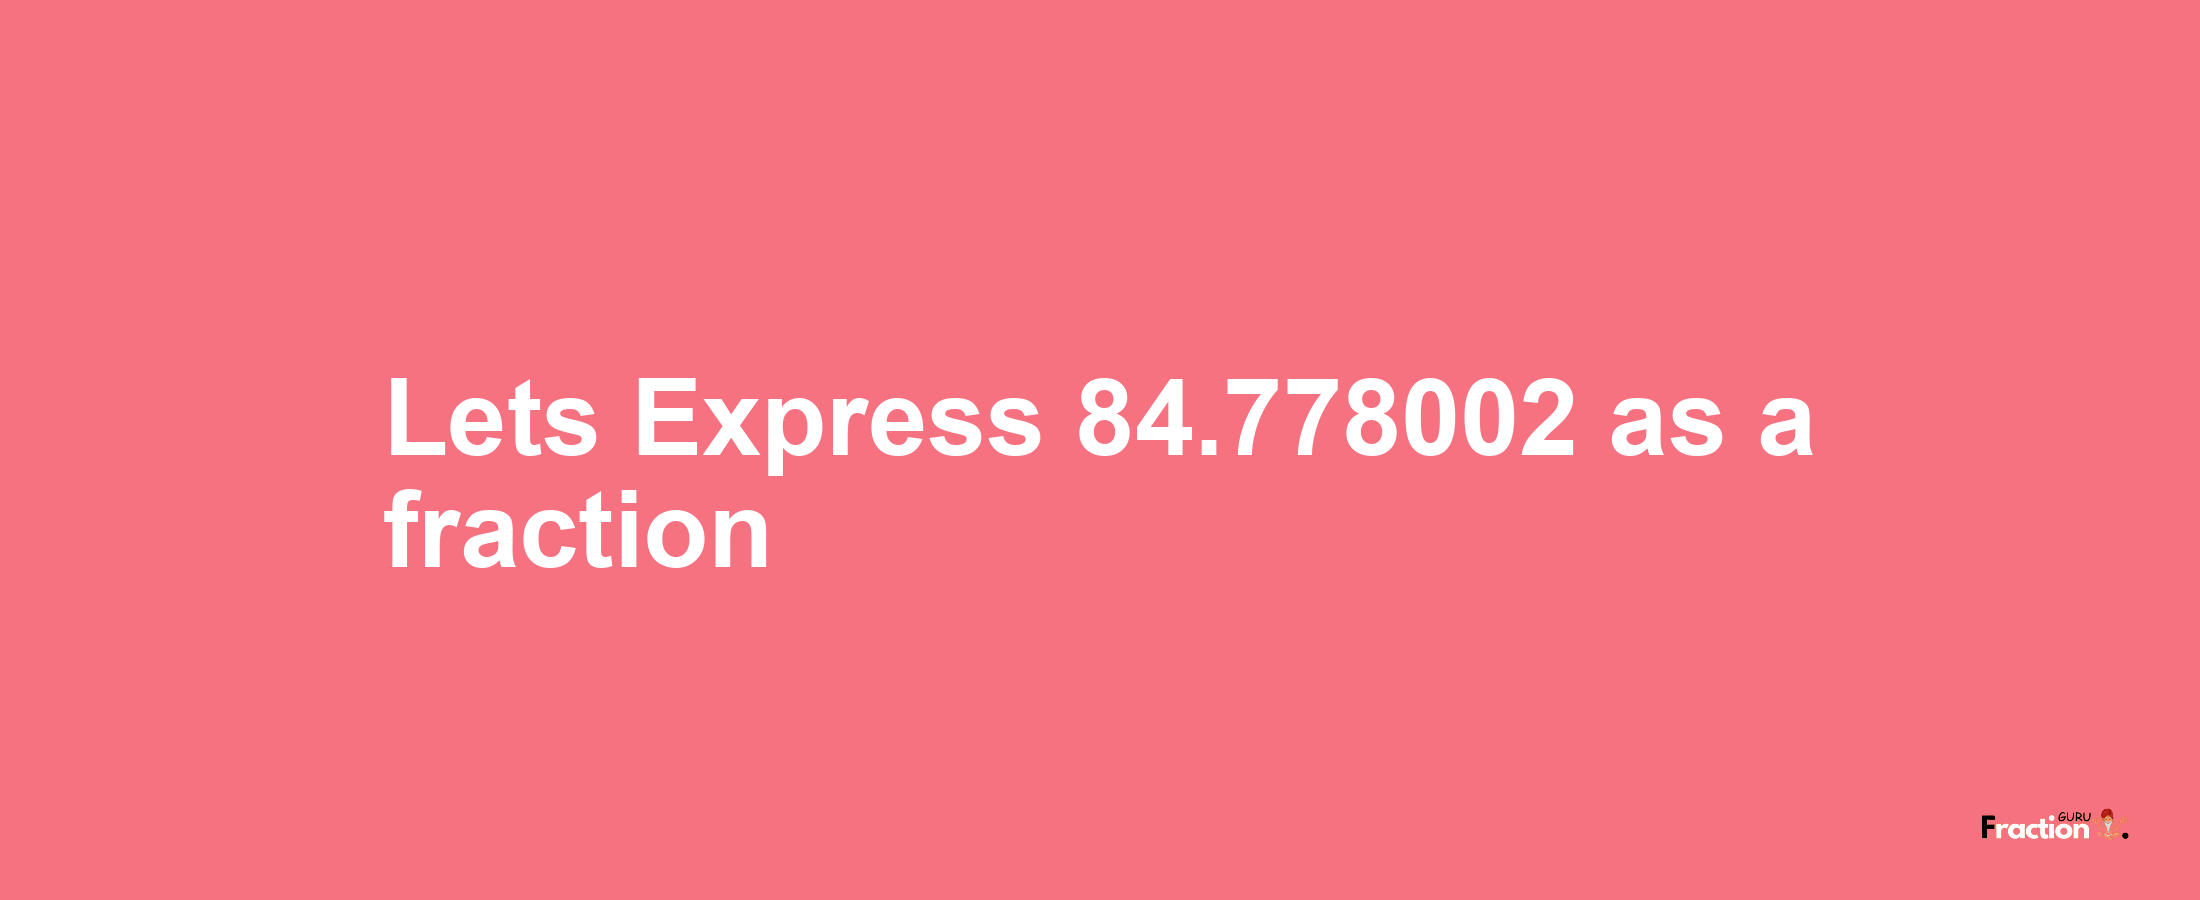 Lets Express 84.778002 as afraction